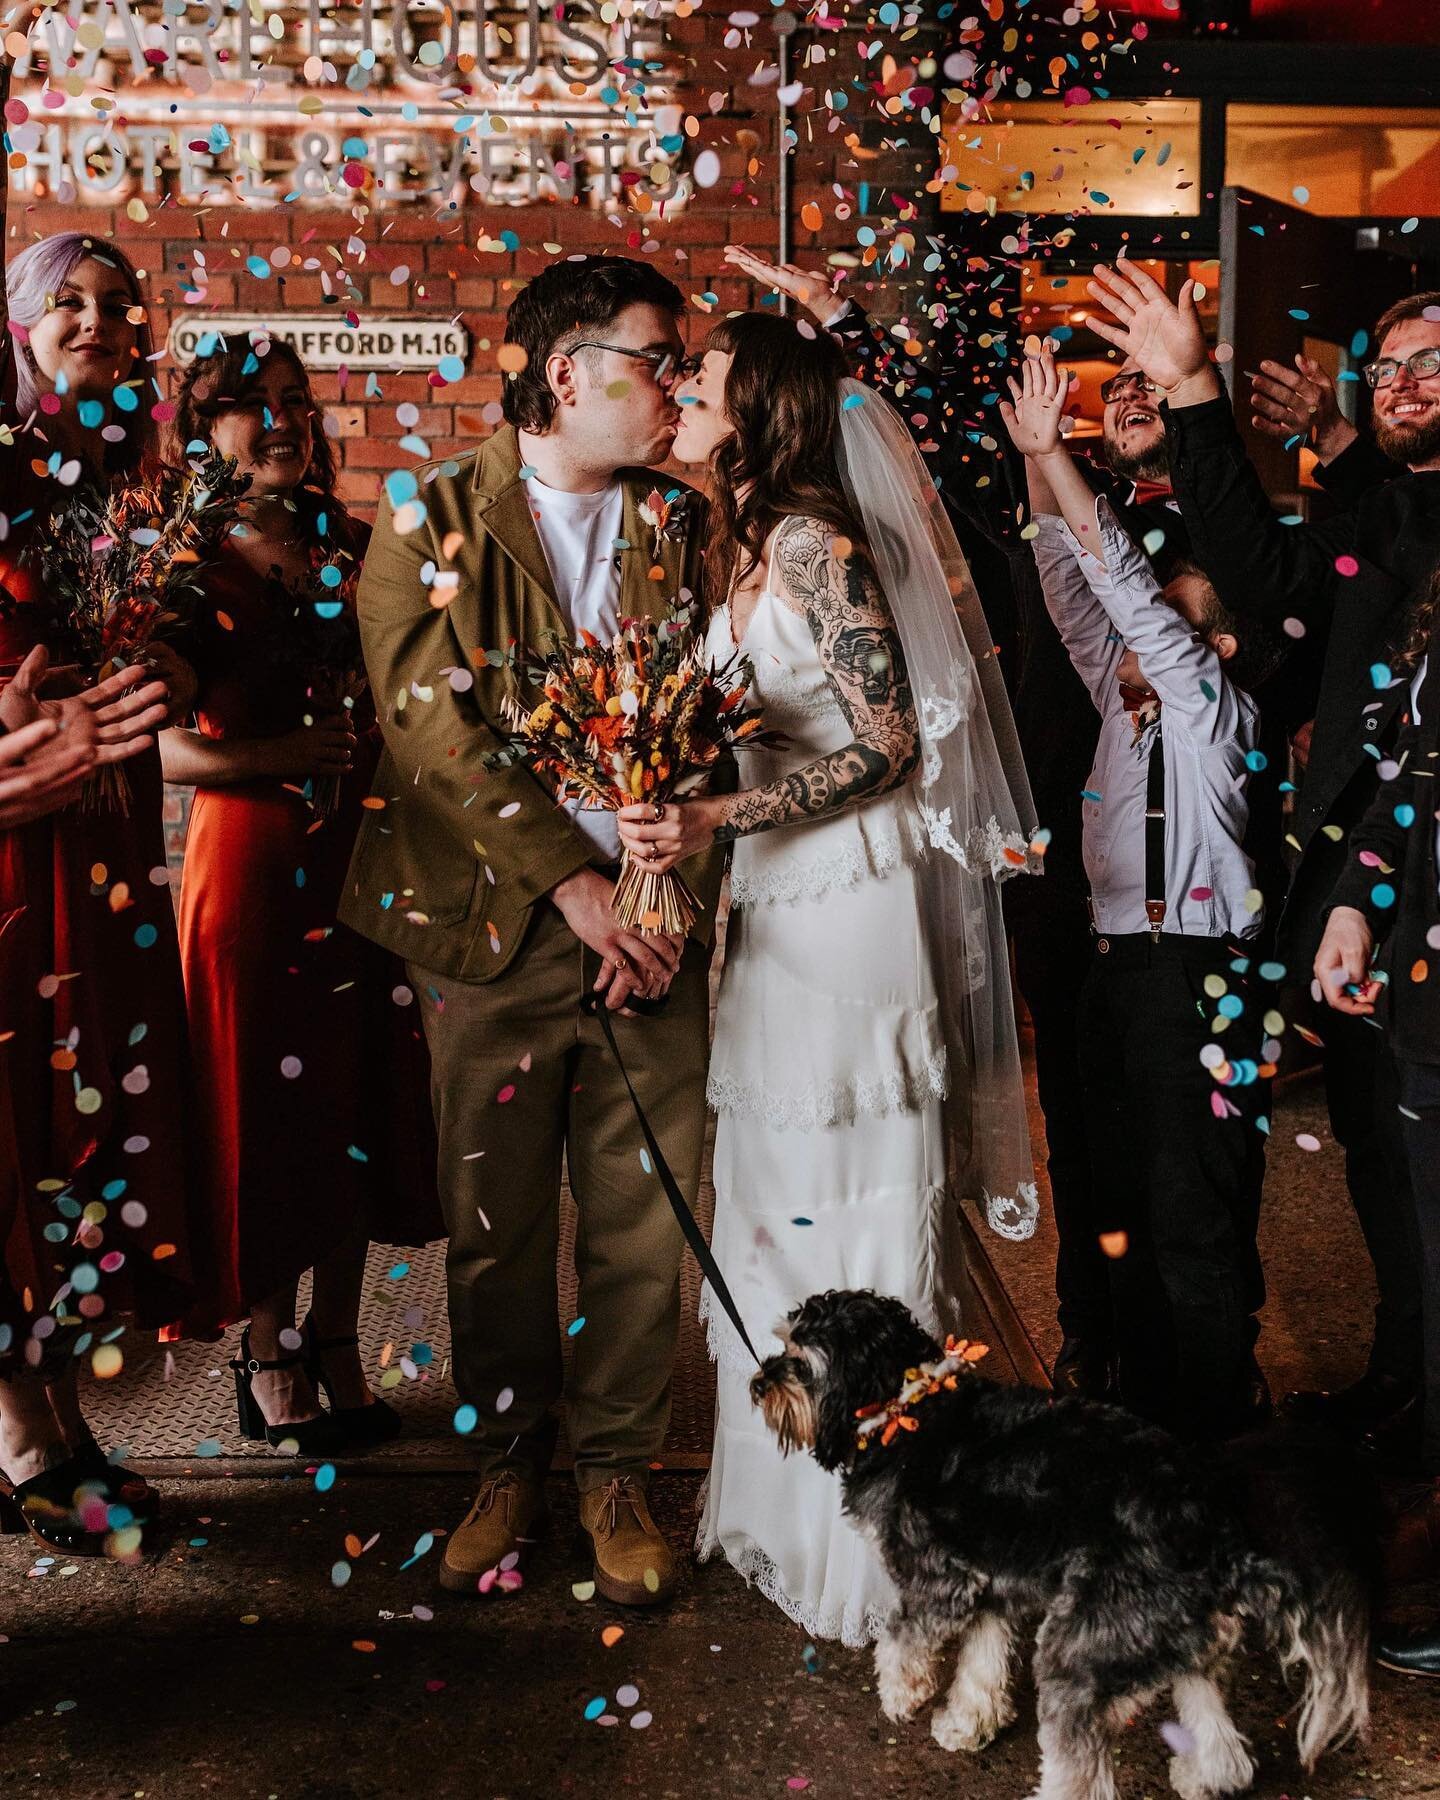 Today&rsquo;s little wedding tip 🎉

Put some confetti to one side so that later on in the evening, we can get a few confetti photos with your bridal party to start off the party. 🥳🙌

Also happy birthday @michellesum I hope you&rsquo;ve had a wonde